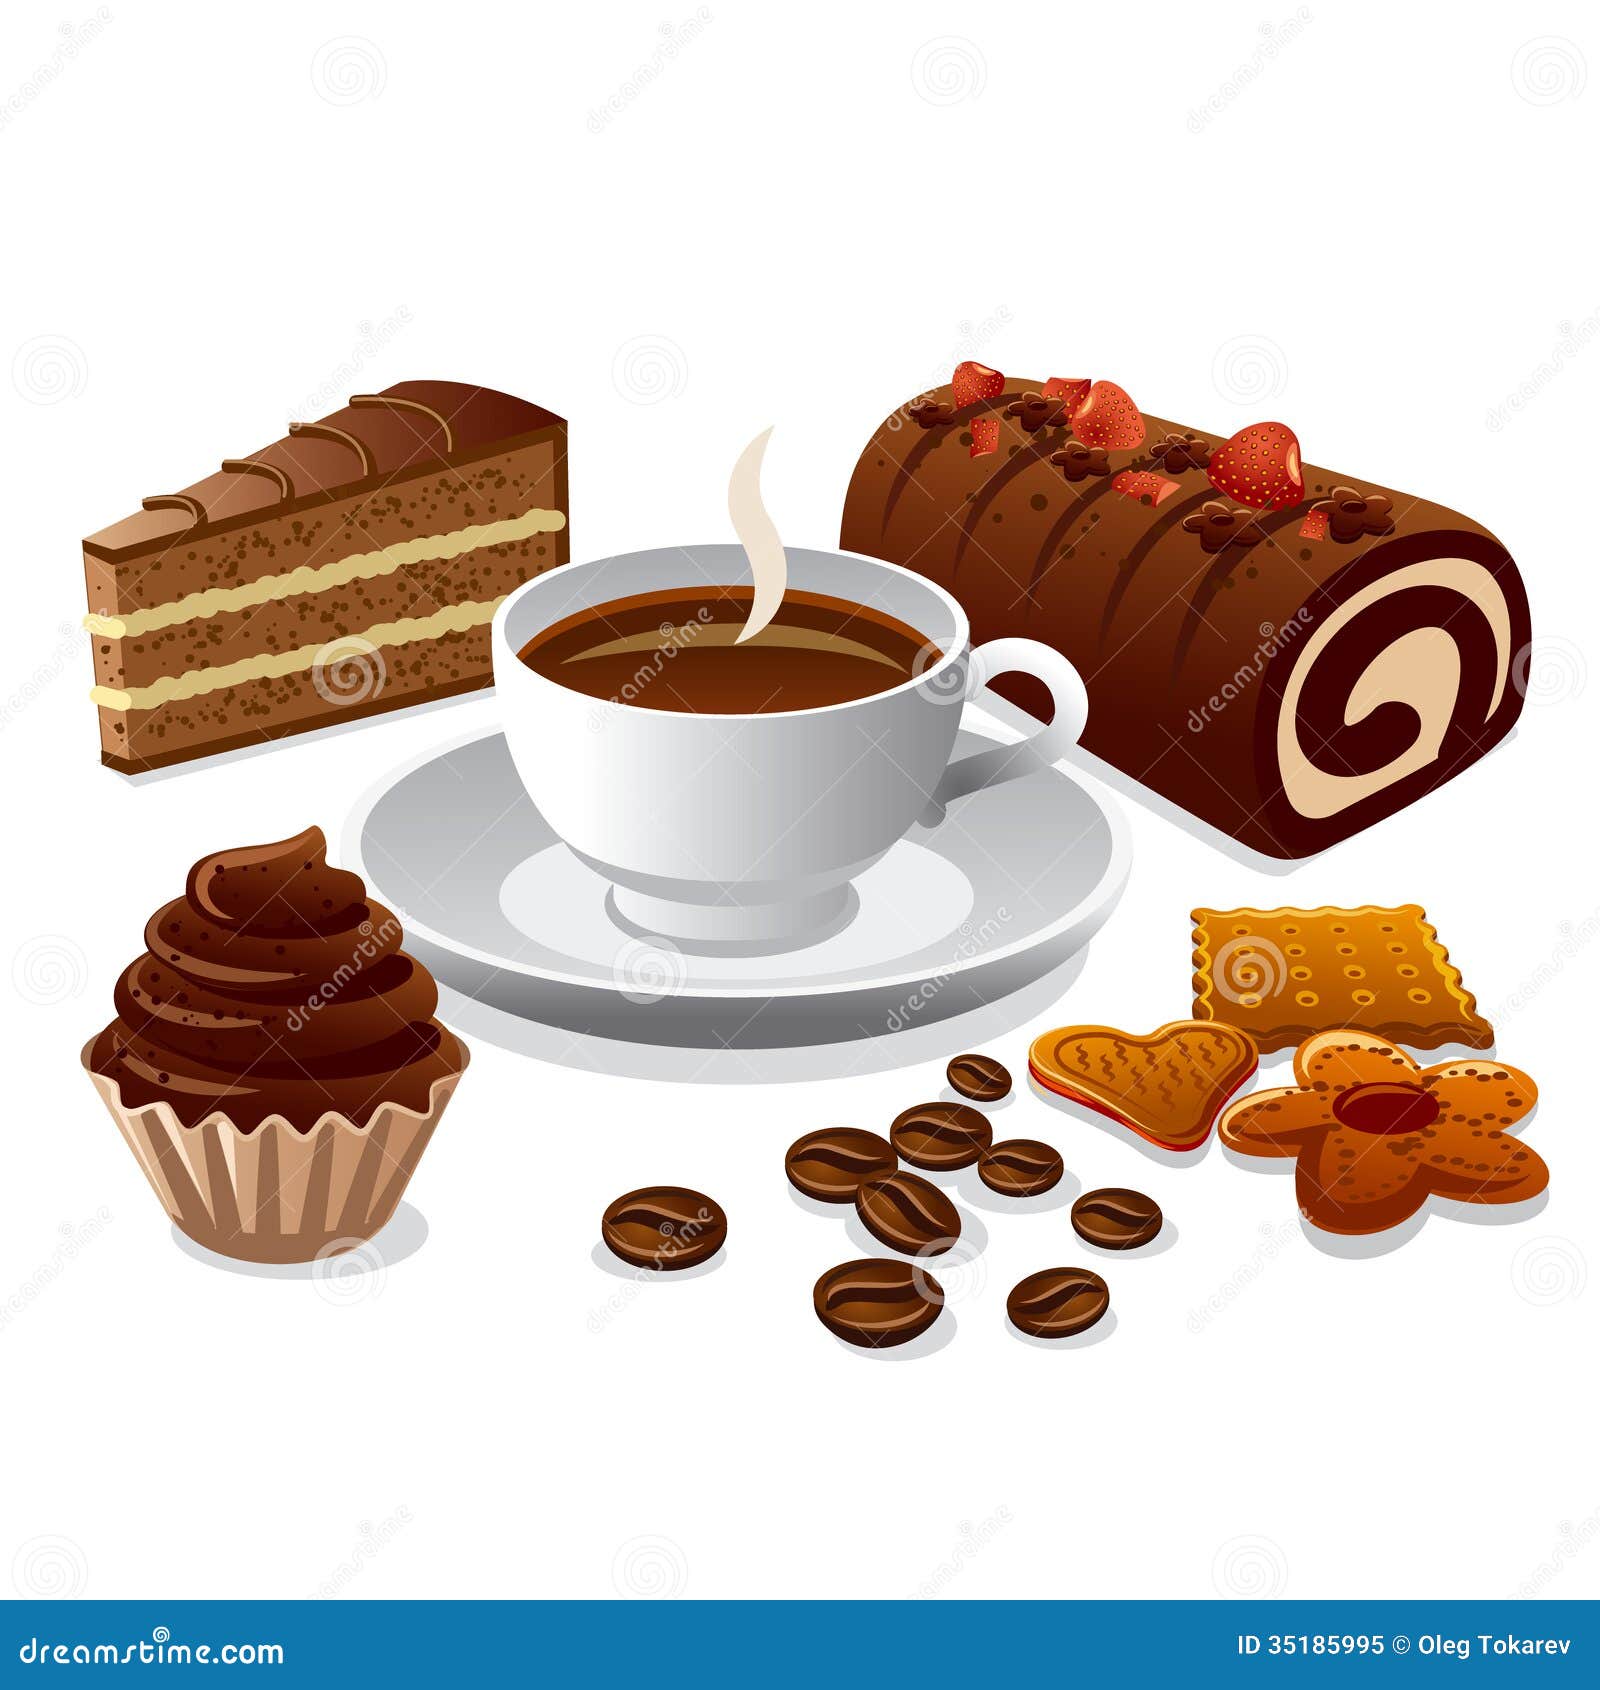 free clipart coffee and cake - photo #24